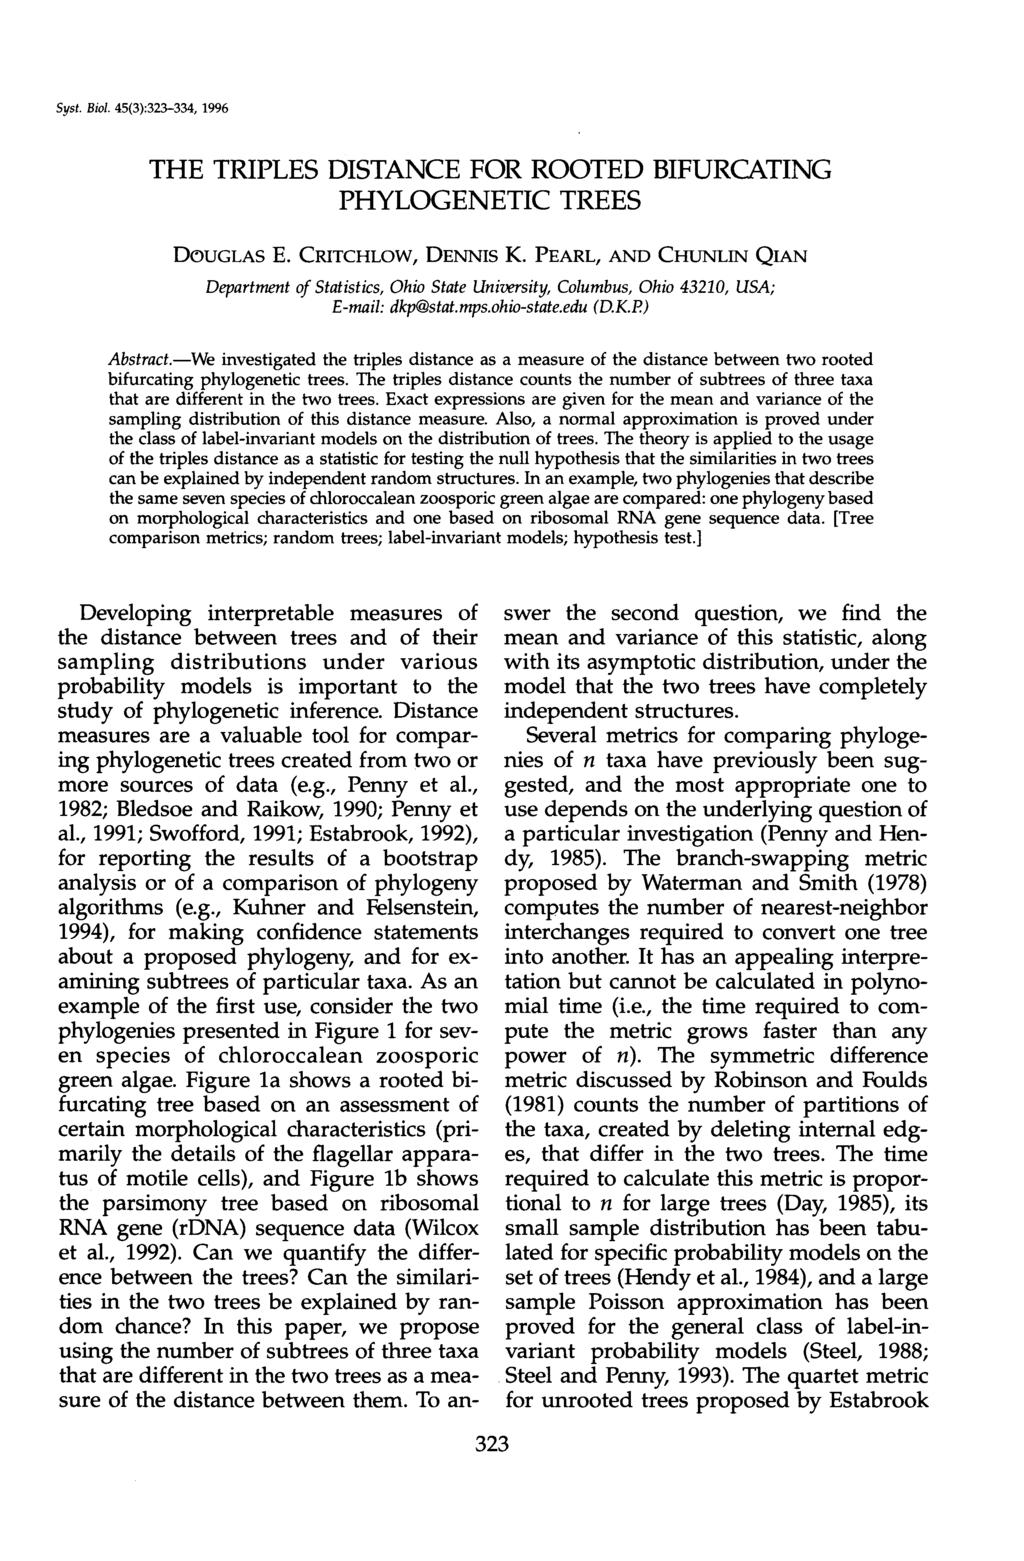 Syst. Biol. 45(3):33-334, 1996 THE TRIPLES DISTANCE FOR ROOTED BIFURCATING PHYLOGENETIC TREES DOUGLAS E. CRITCHLOW, DENNIS K.